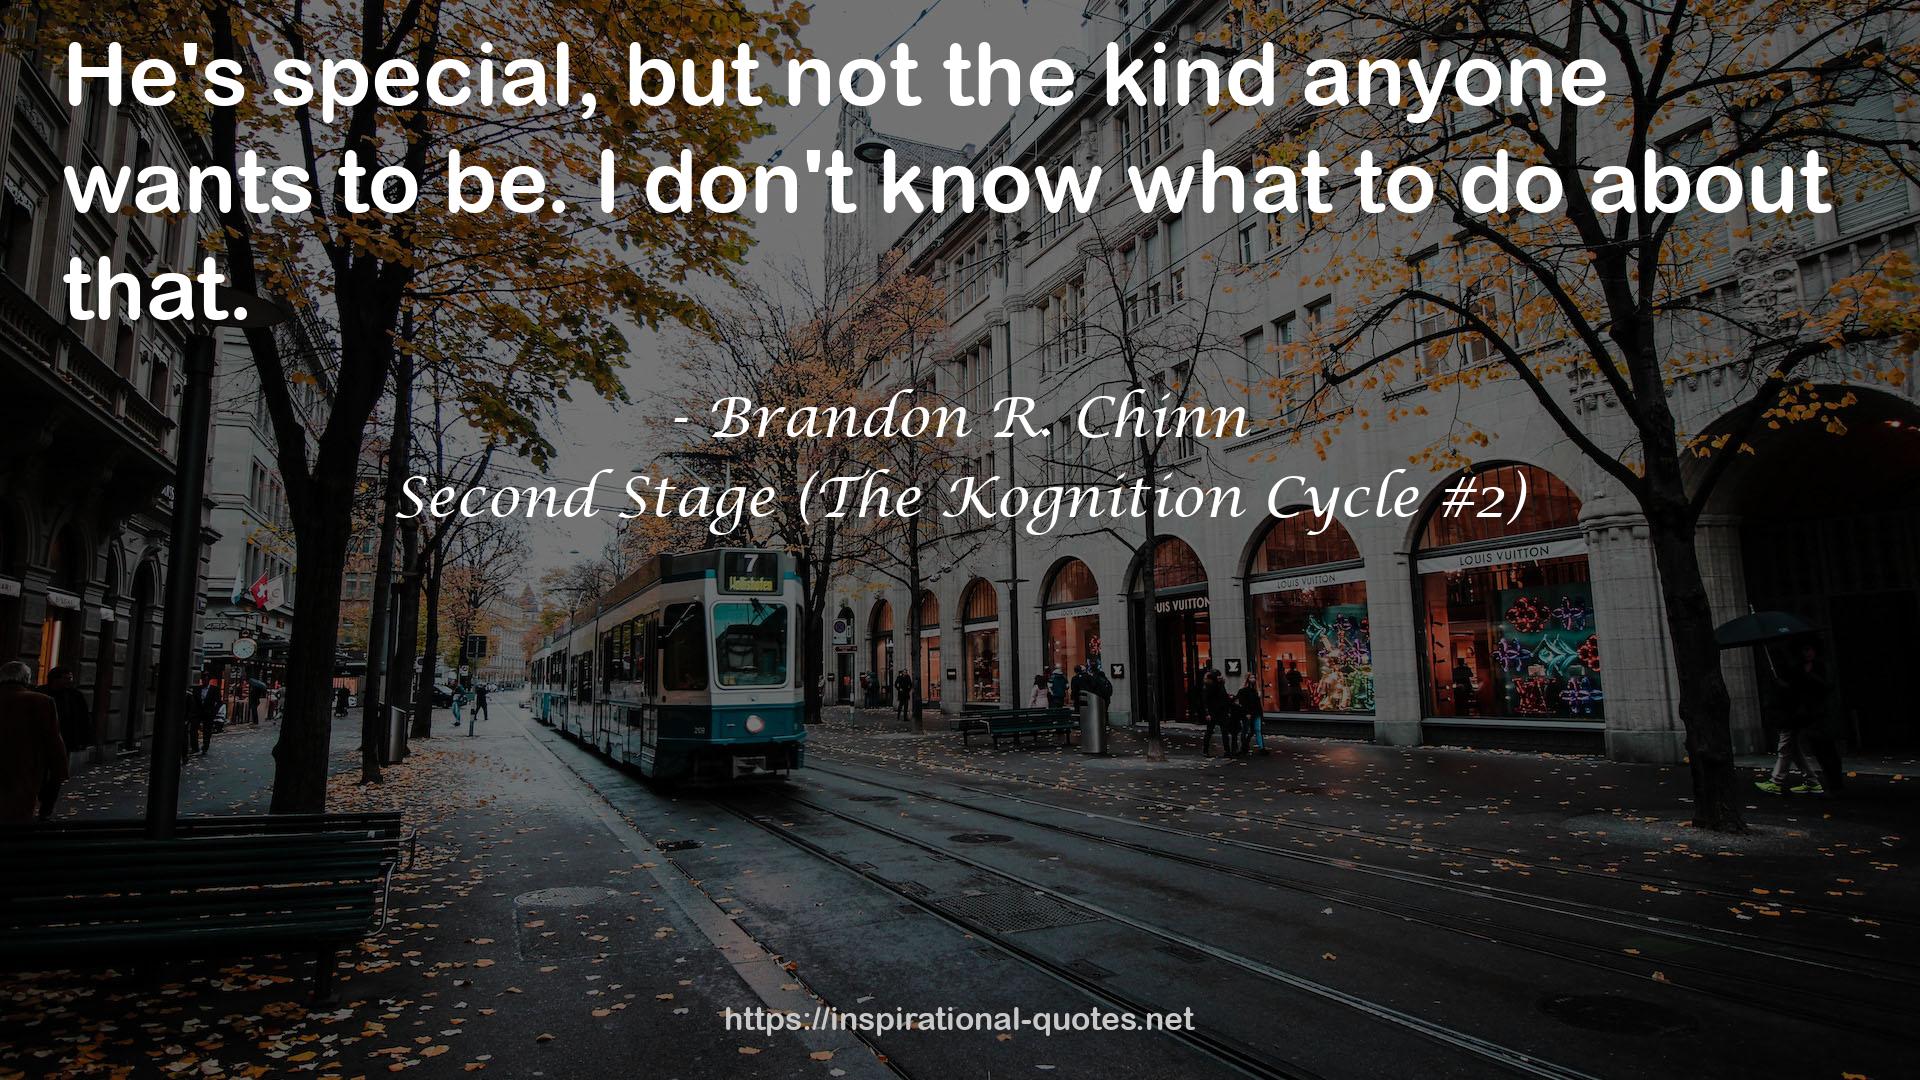 Second Stage (The Kognition Cycle #2) QUOTES